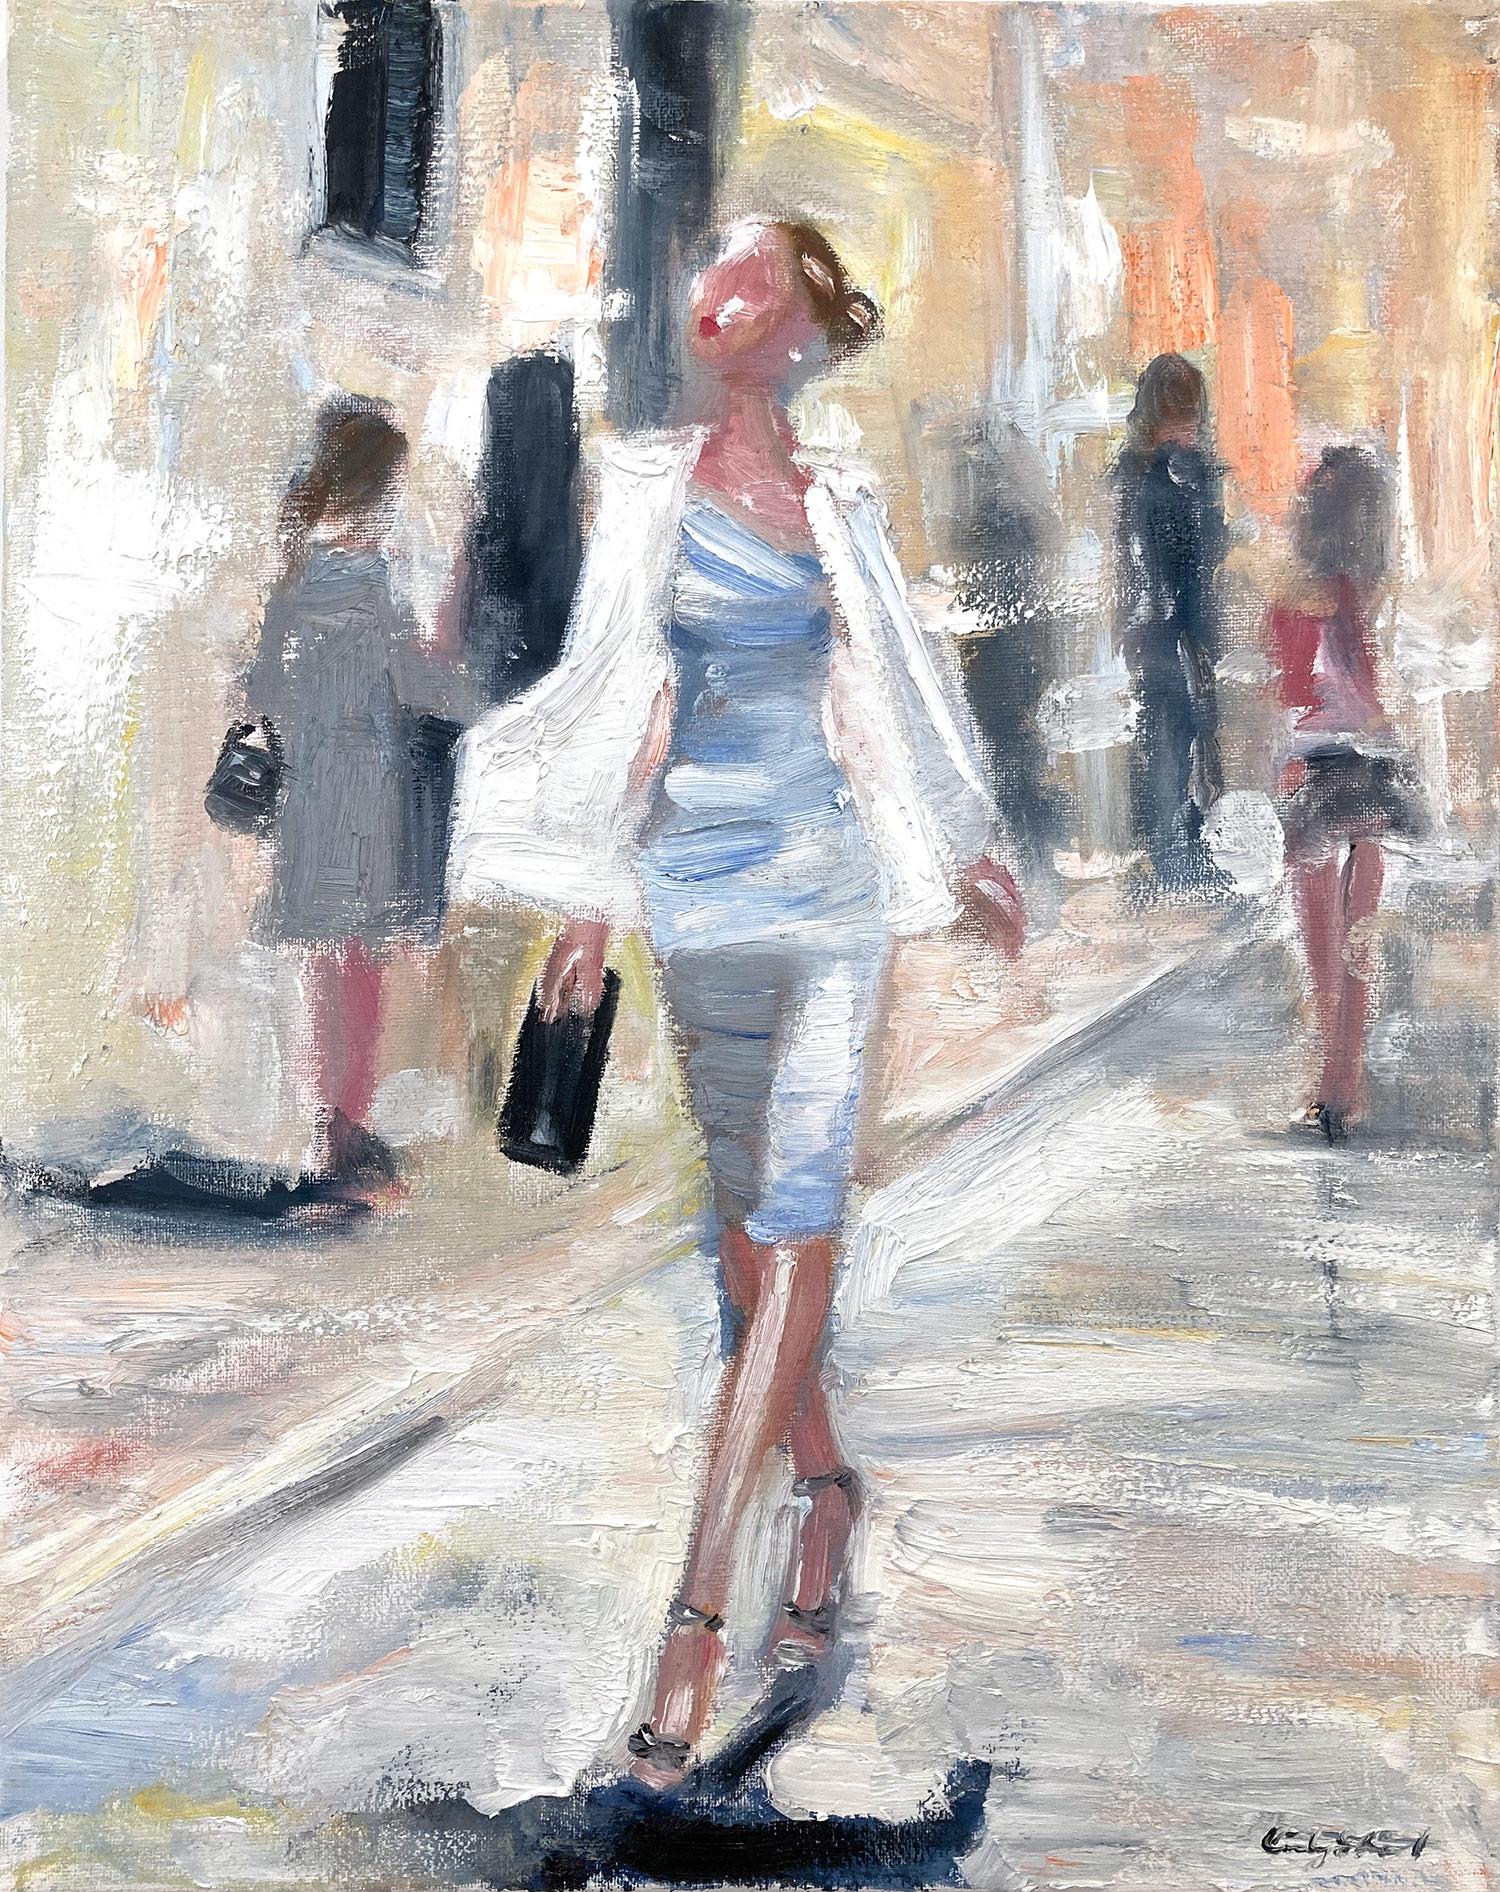 Cindy Shaoul Figurative Painting - "Stepping Out Sarah Jessica Parker" Impressionistic Painting of Sex & the City